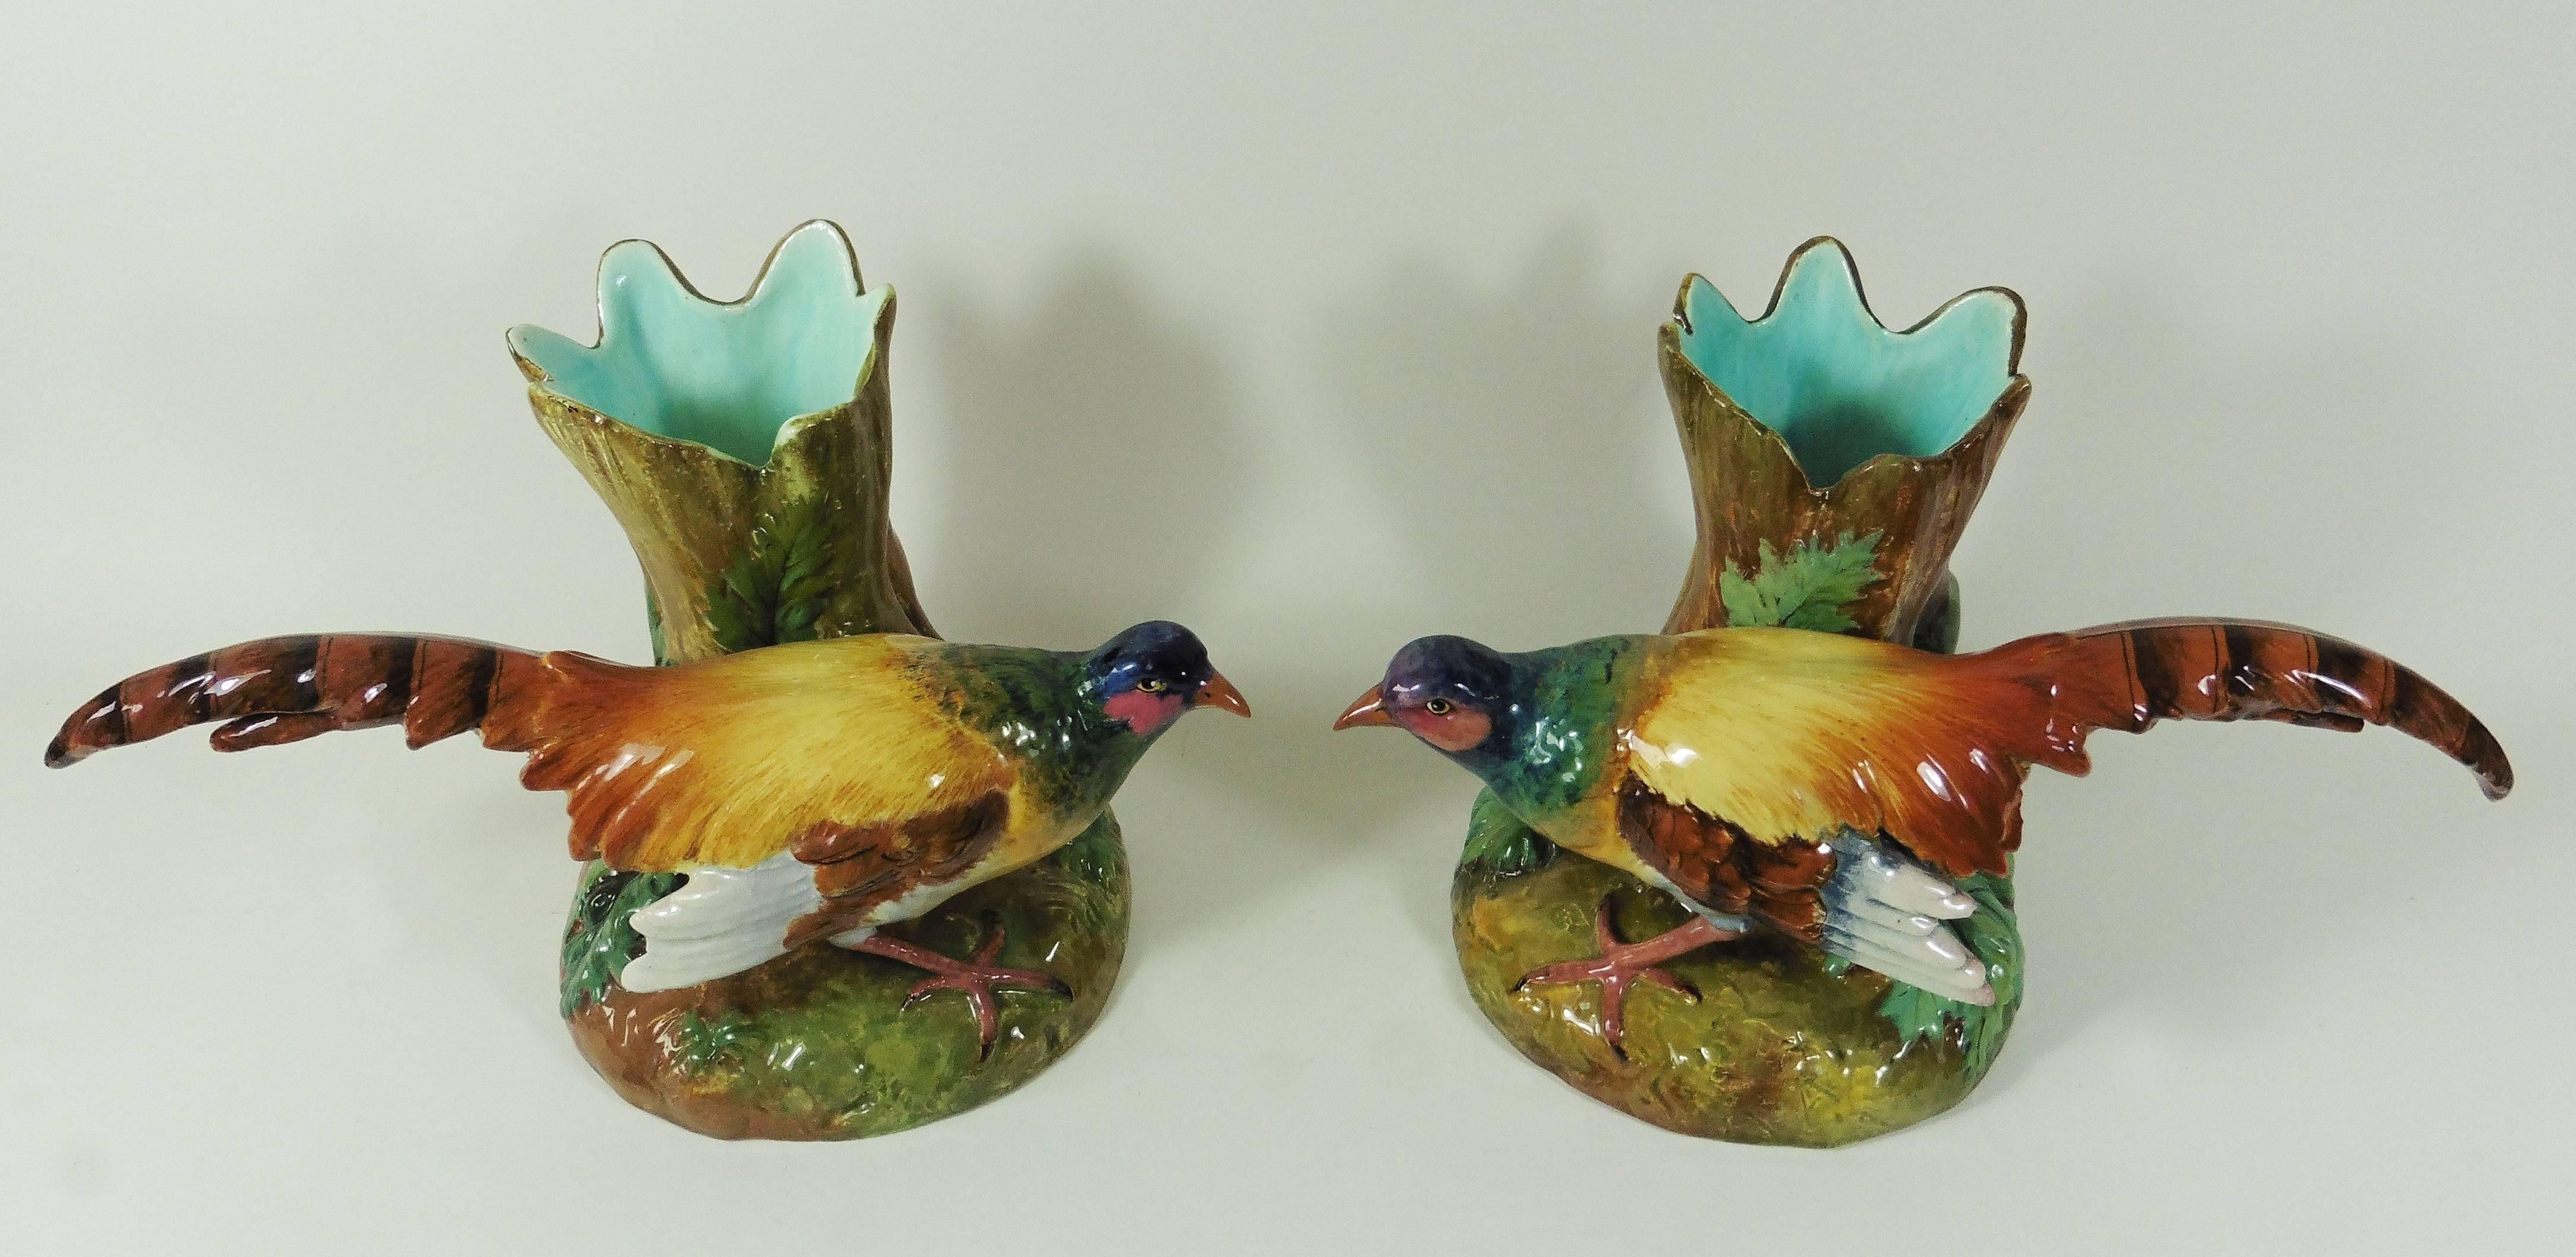 Rare pair of Majolica pheasants vases signed Jerome Massier Vallauris Alpes Maritimes circa 1890.
Very colorful, the vases are in the shape of tree trunk.
The Massier are known for the quality of their unique enamels and paintings. The Massier